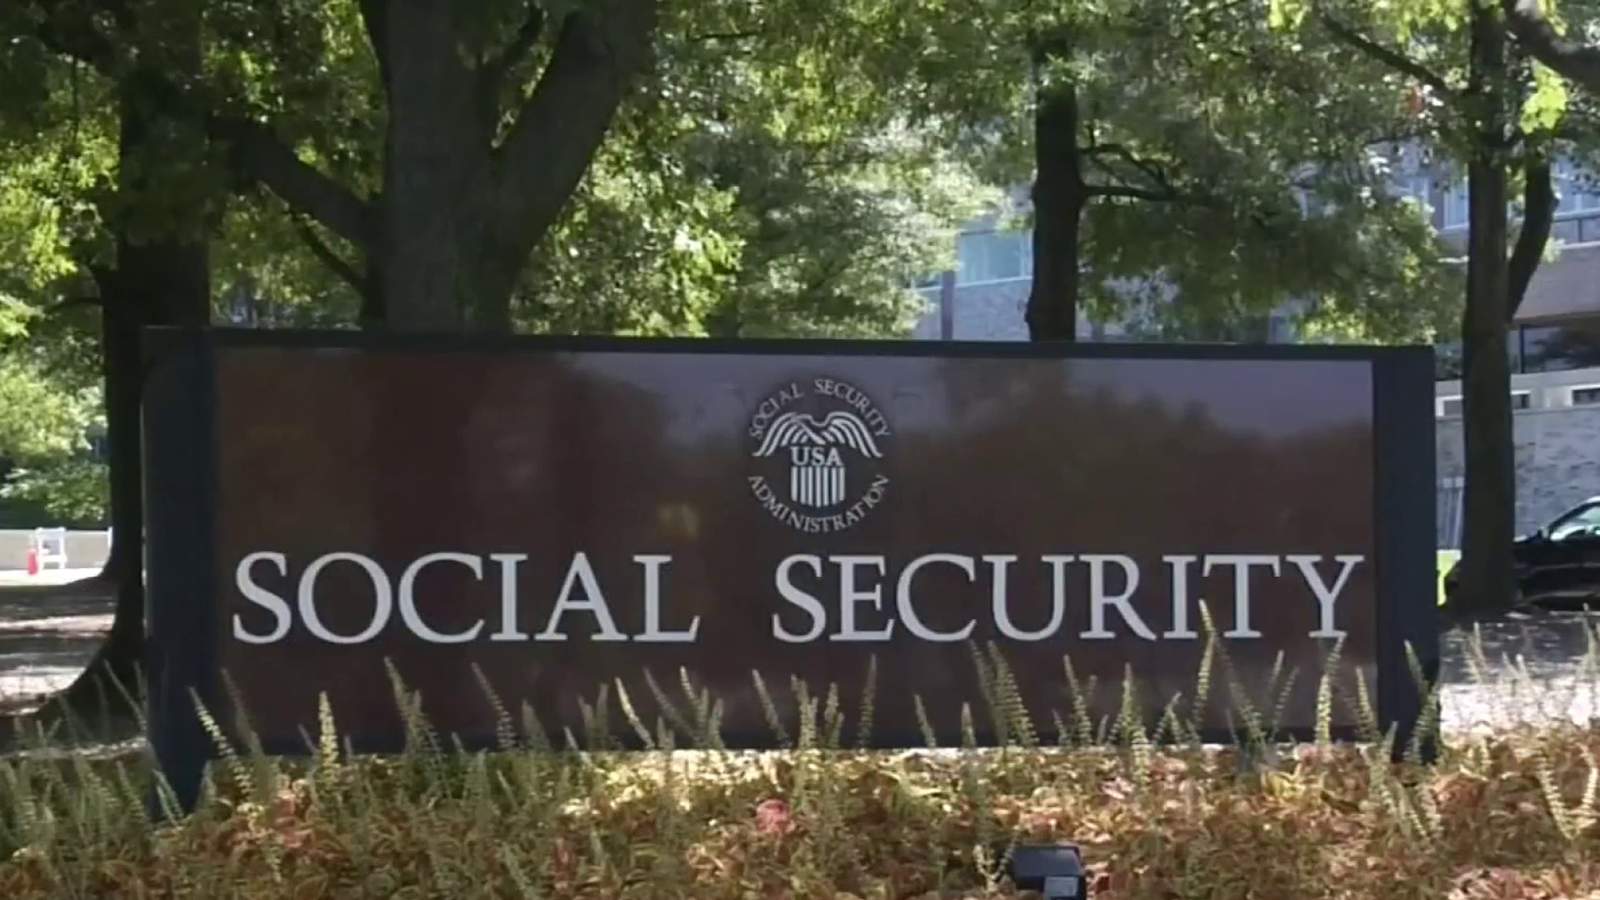 Social security recipients will NOT need to file a tax return to get a stimulus check